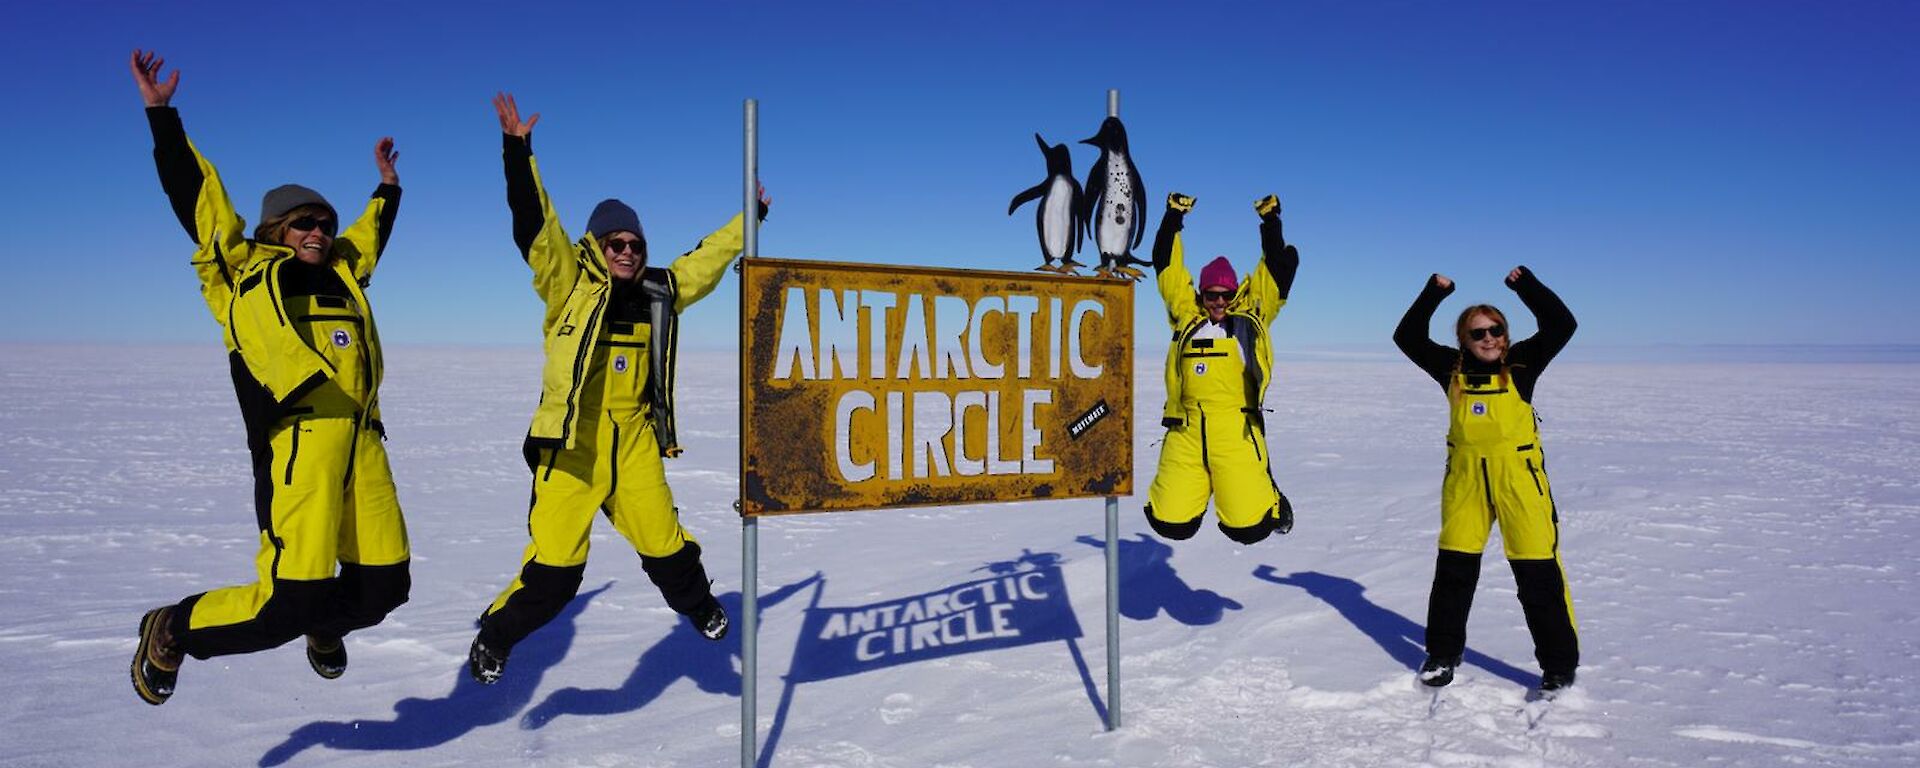 Four woman jumping with excitement next to the Antarctic Circle sign